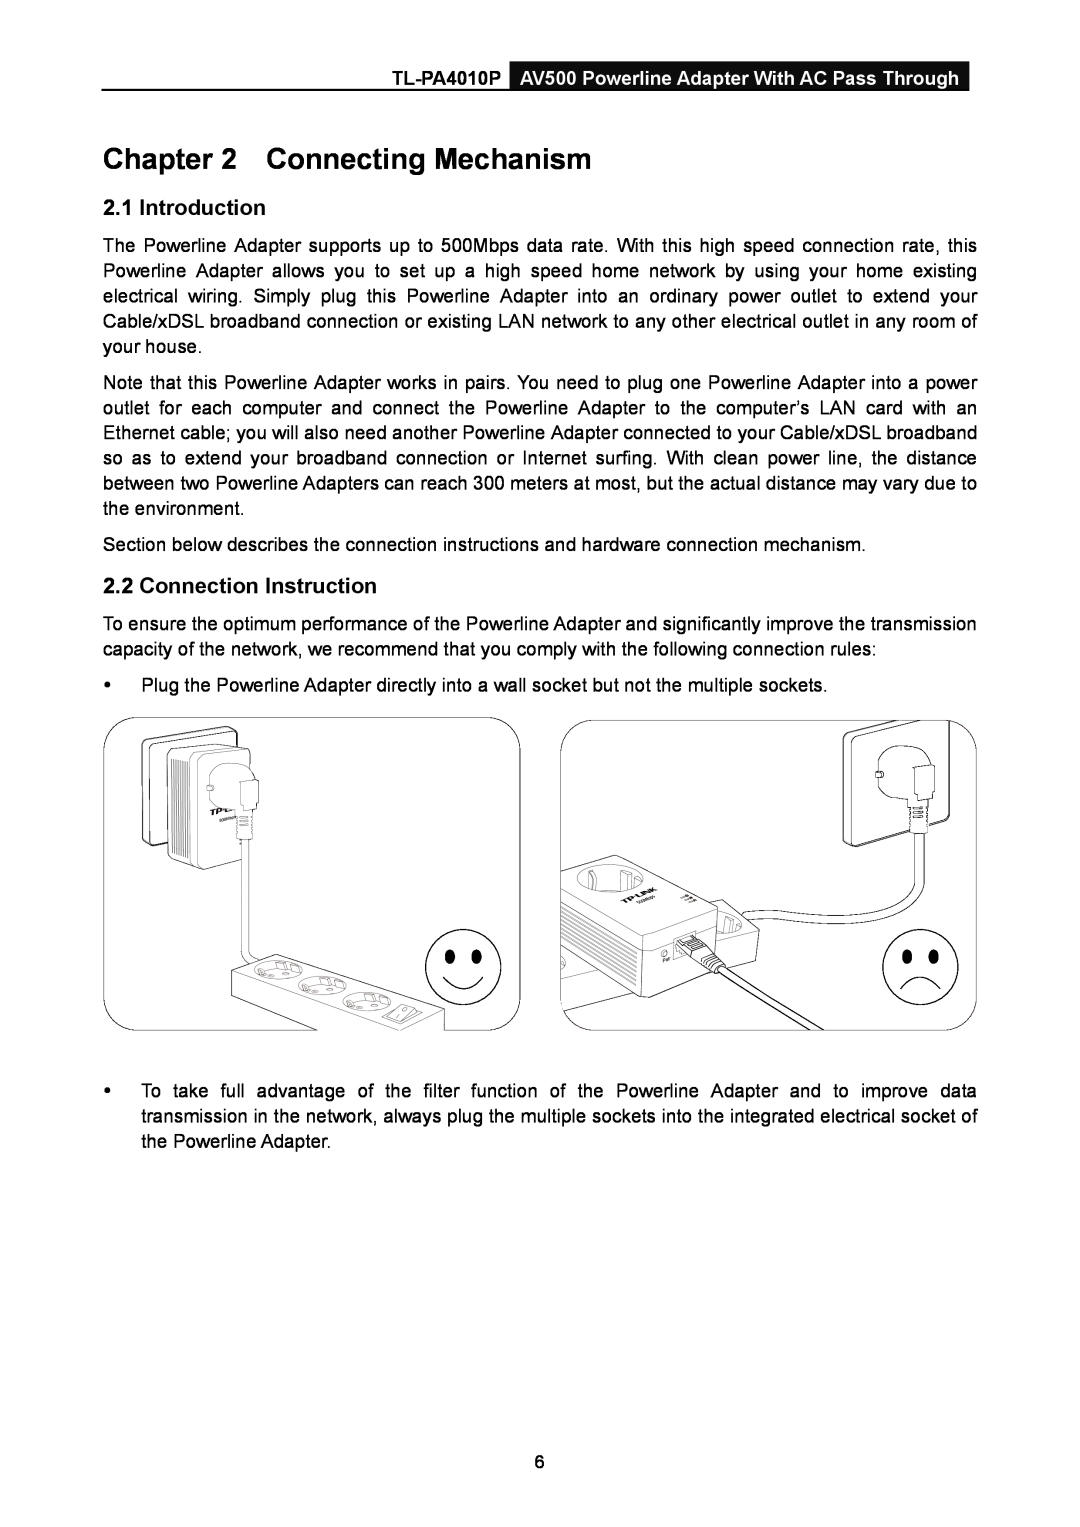 TP-Link TL-PA4010P manual Connecting Mechanism, Introduction, Connection Instruction 